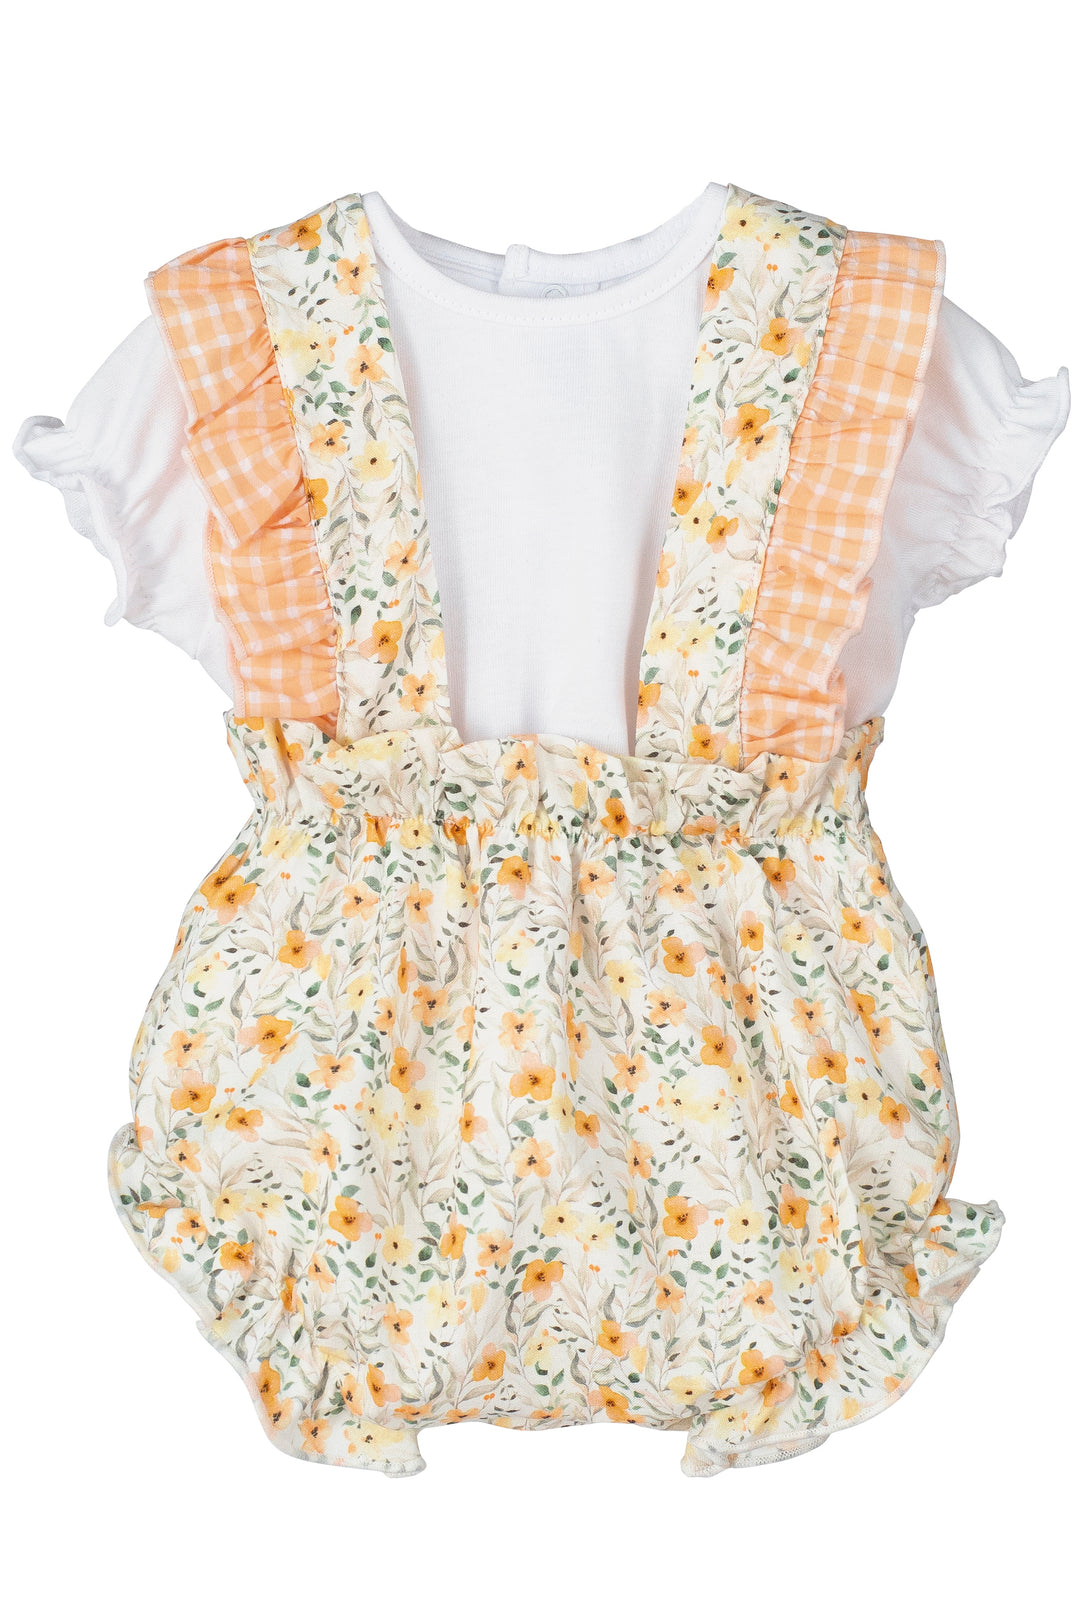 Calamaro PREORDER "Aria" Peach Floral Blouse & Bloomers | Millie and John